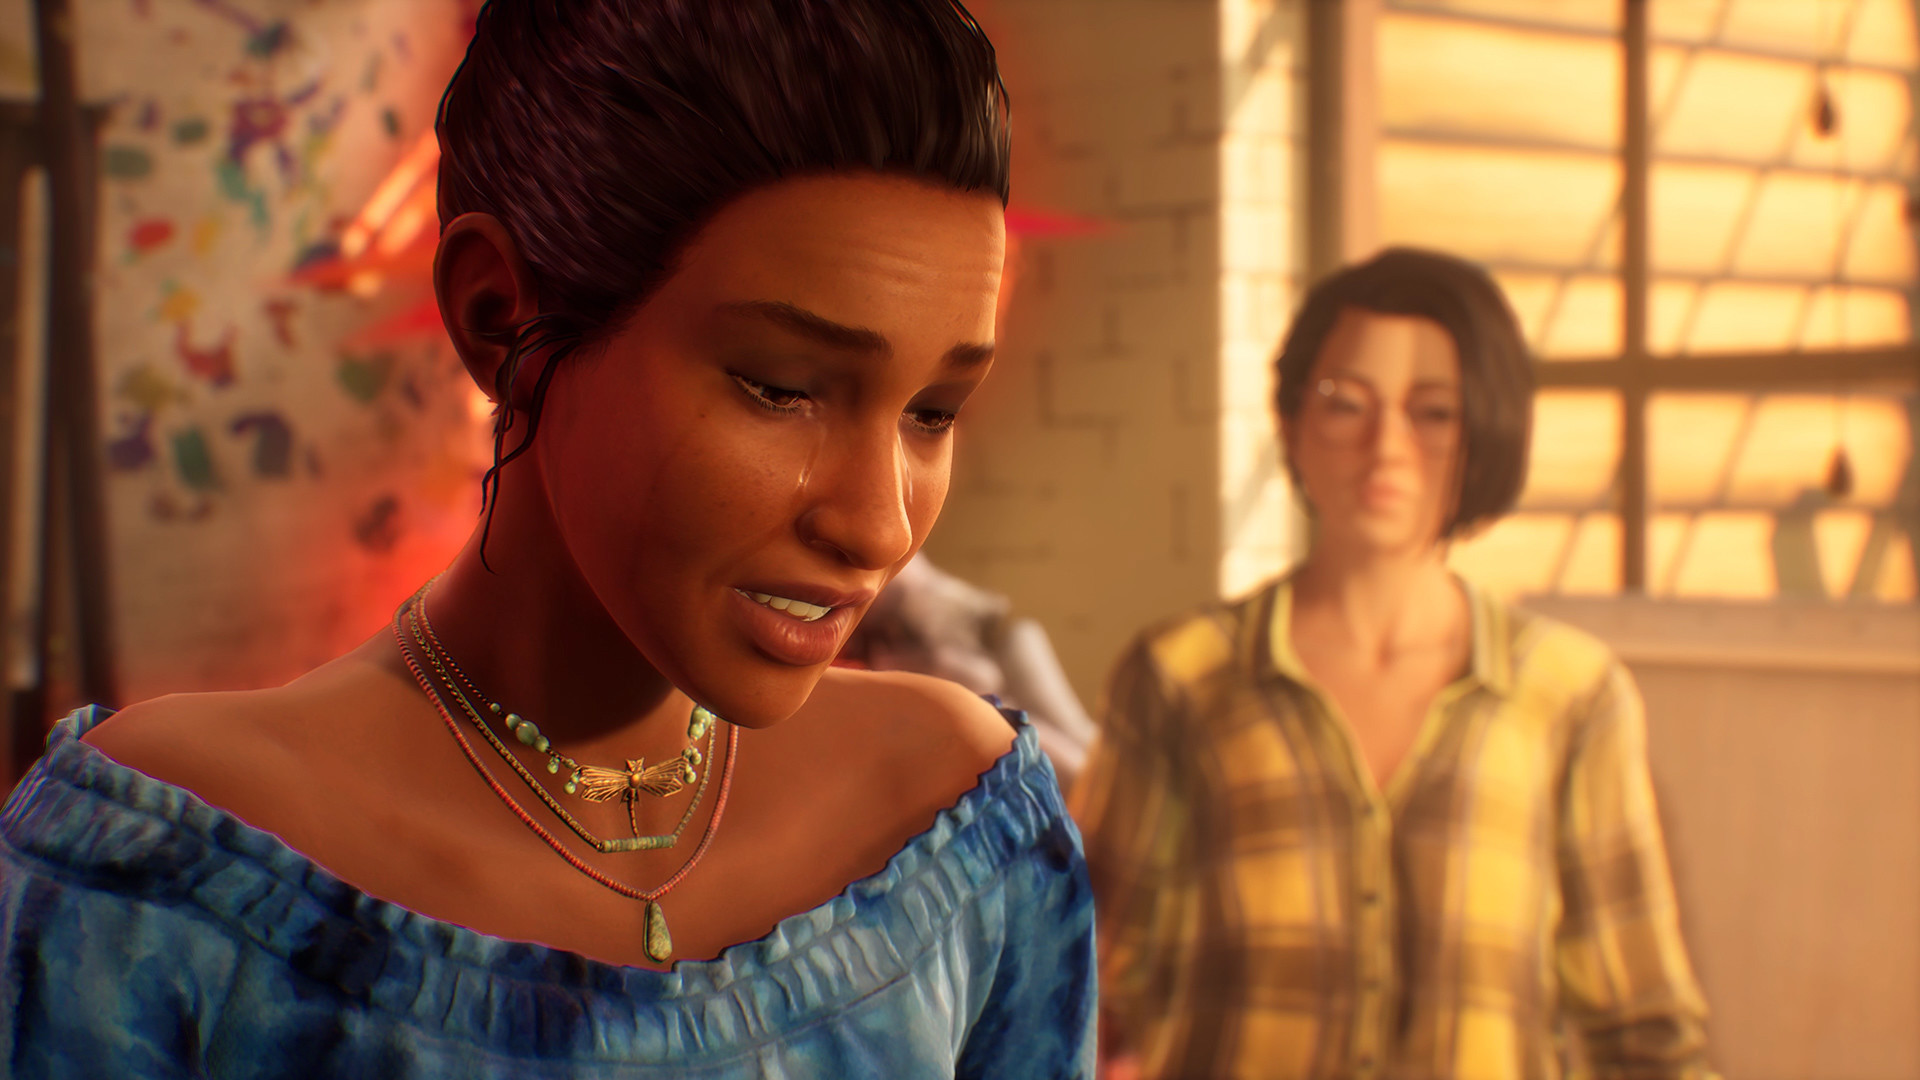 Life Is Strange True Colors Review: What About Alex? – GameSkinny